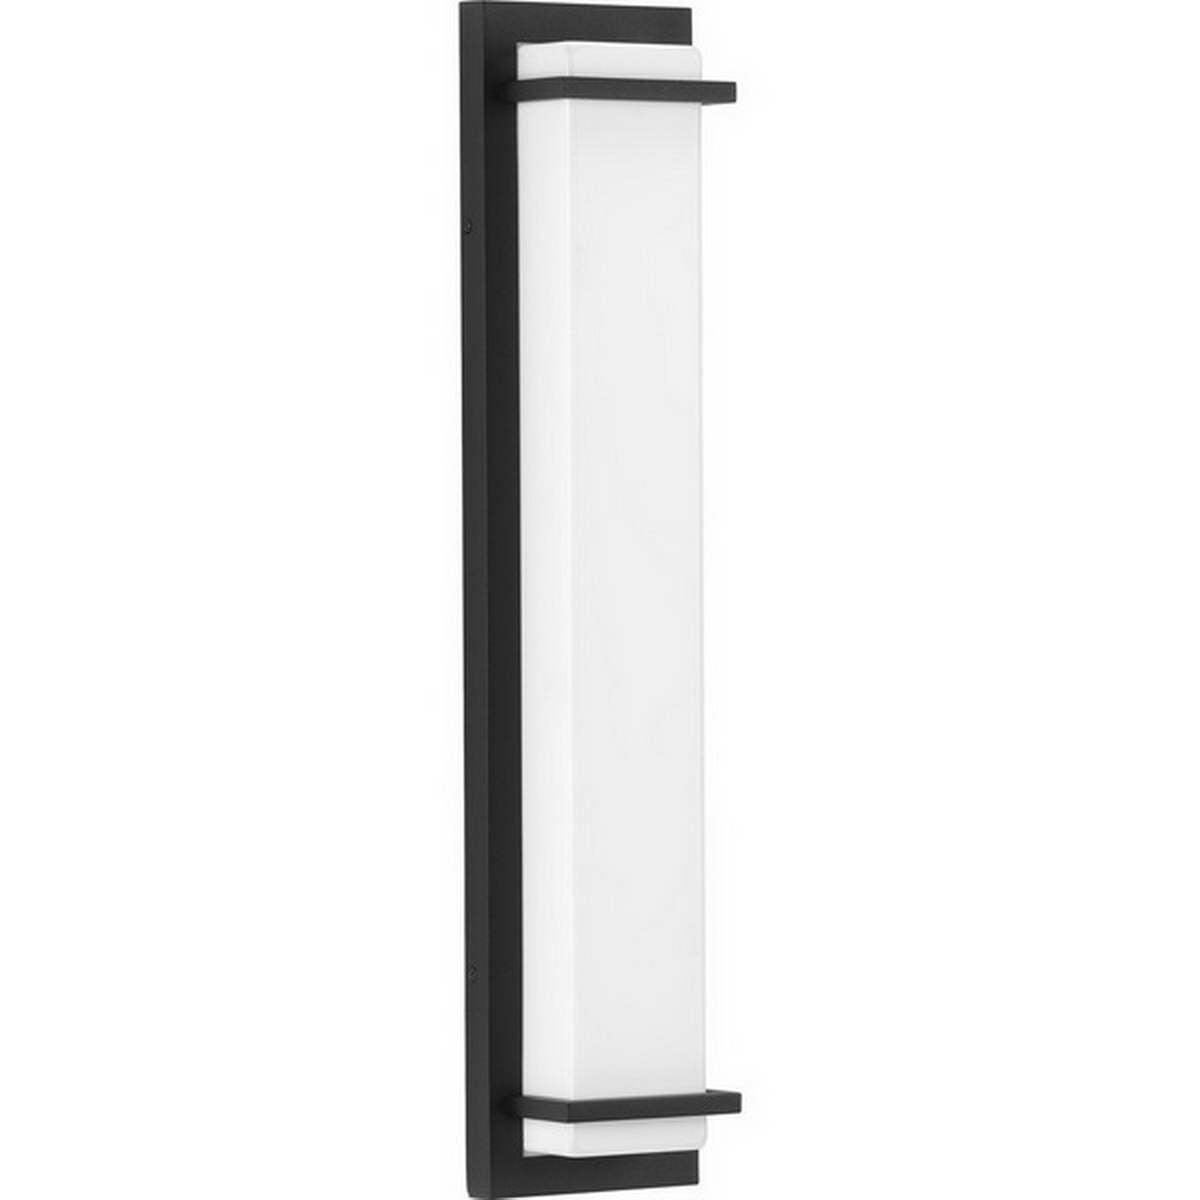 Z-1080 LED 24 in. Outdoor Wall Sconce